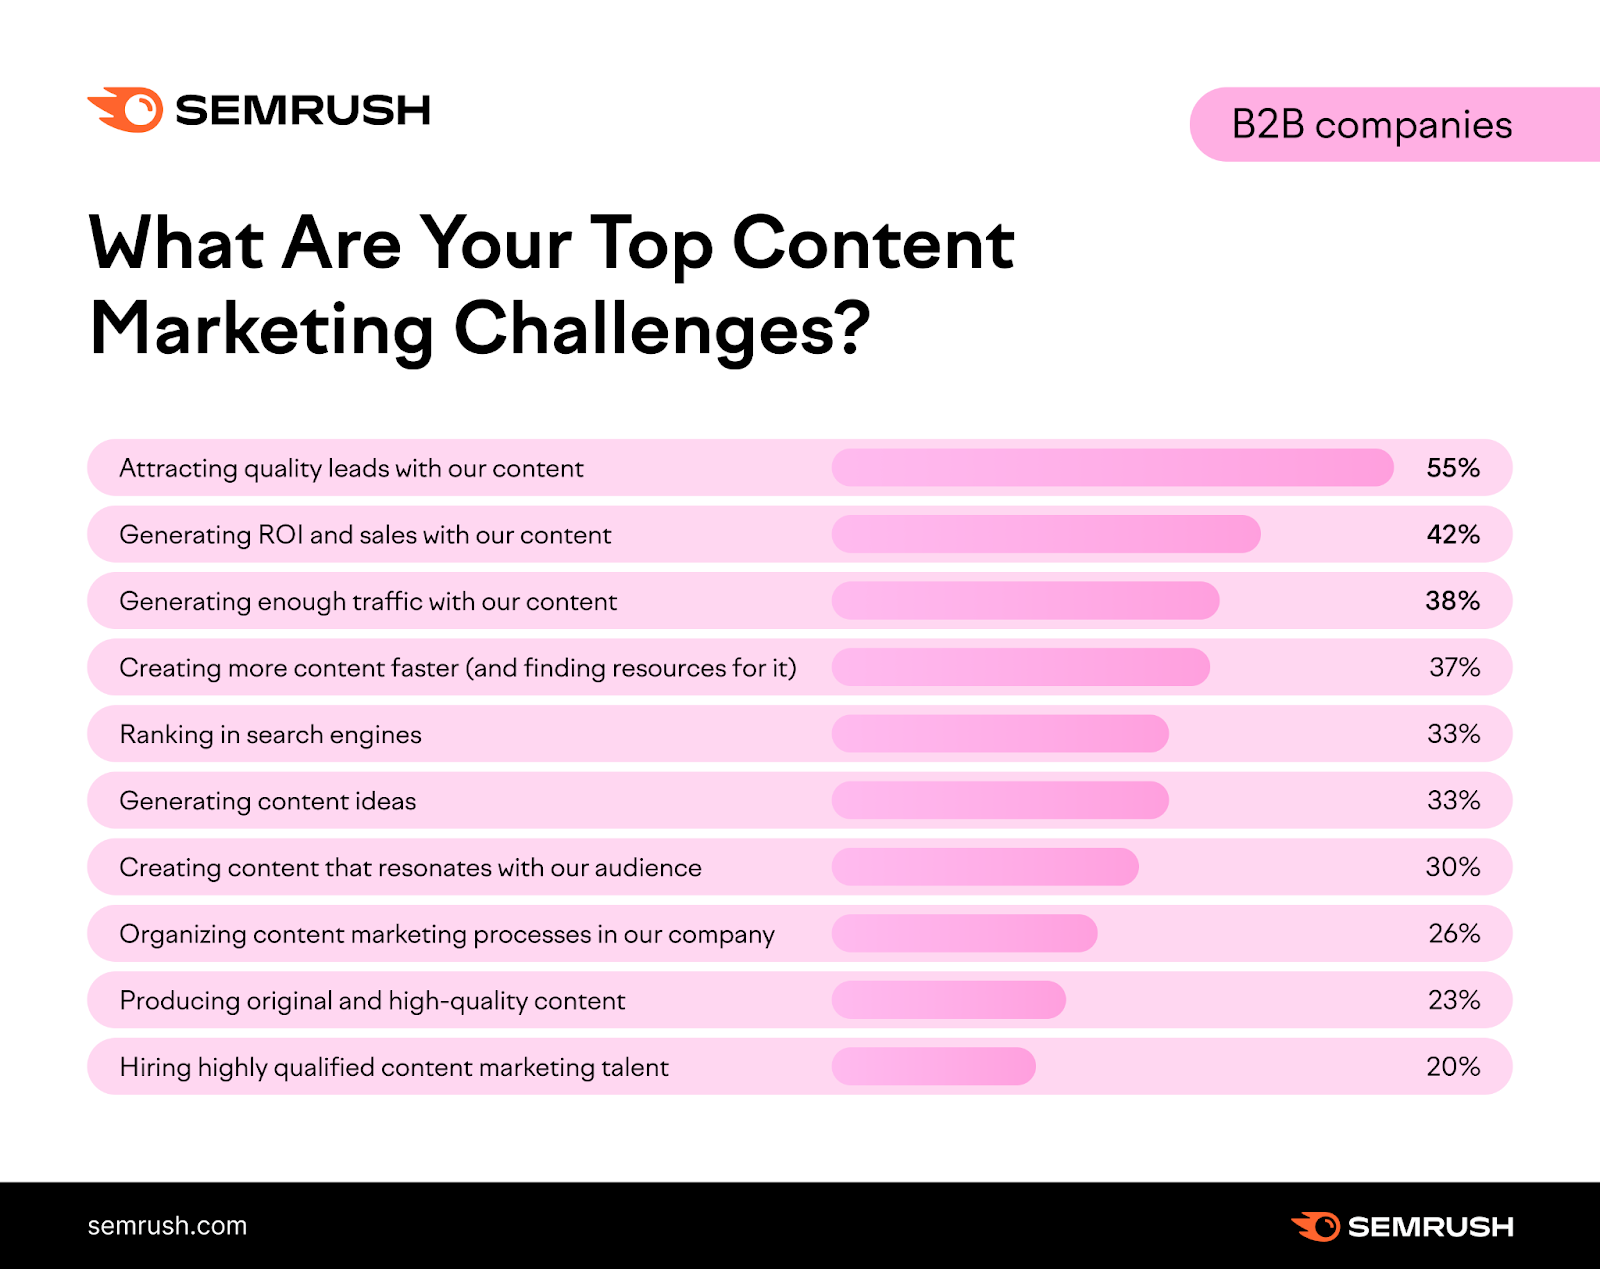 Top content marketing challenges of B2B companies in 2023